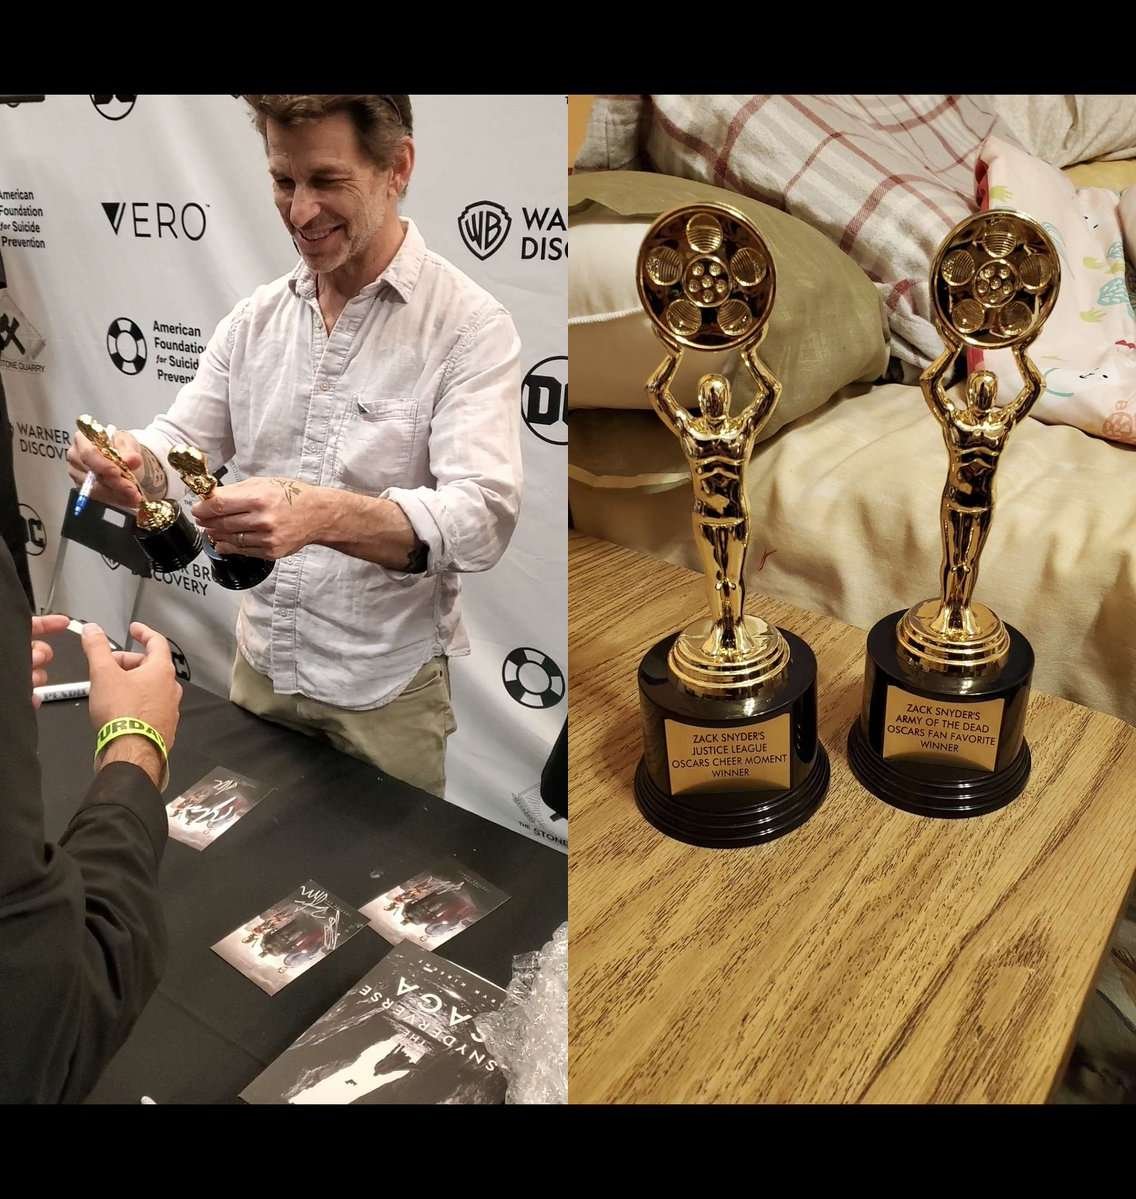 Felt it would be fitting to give these two fan awards to Zack at a fan convention as a fan myself. 
#OscarsCheerMoment
#OscarsFanFavorite 
#SnyderCon #FullCircle
#RestoreTheSnyderVerse
#SellSnyderVerseToNetflix
Wish I got a pic of Zack posing with them but security was rushing.